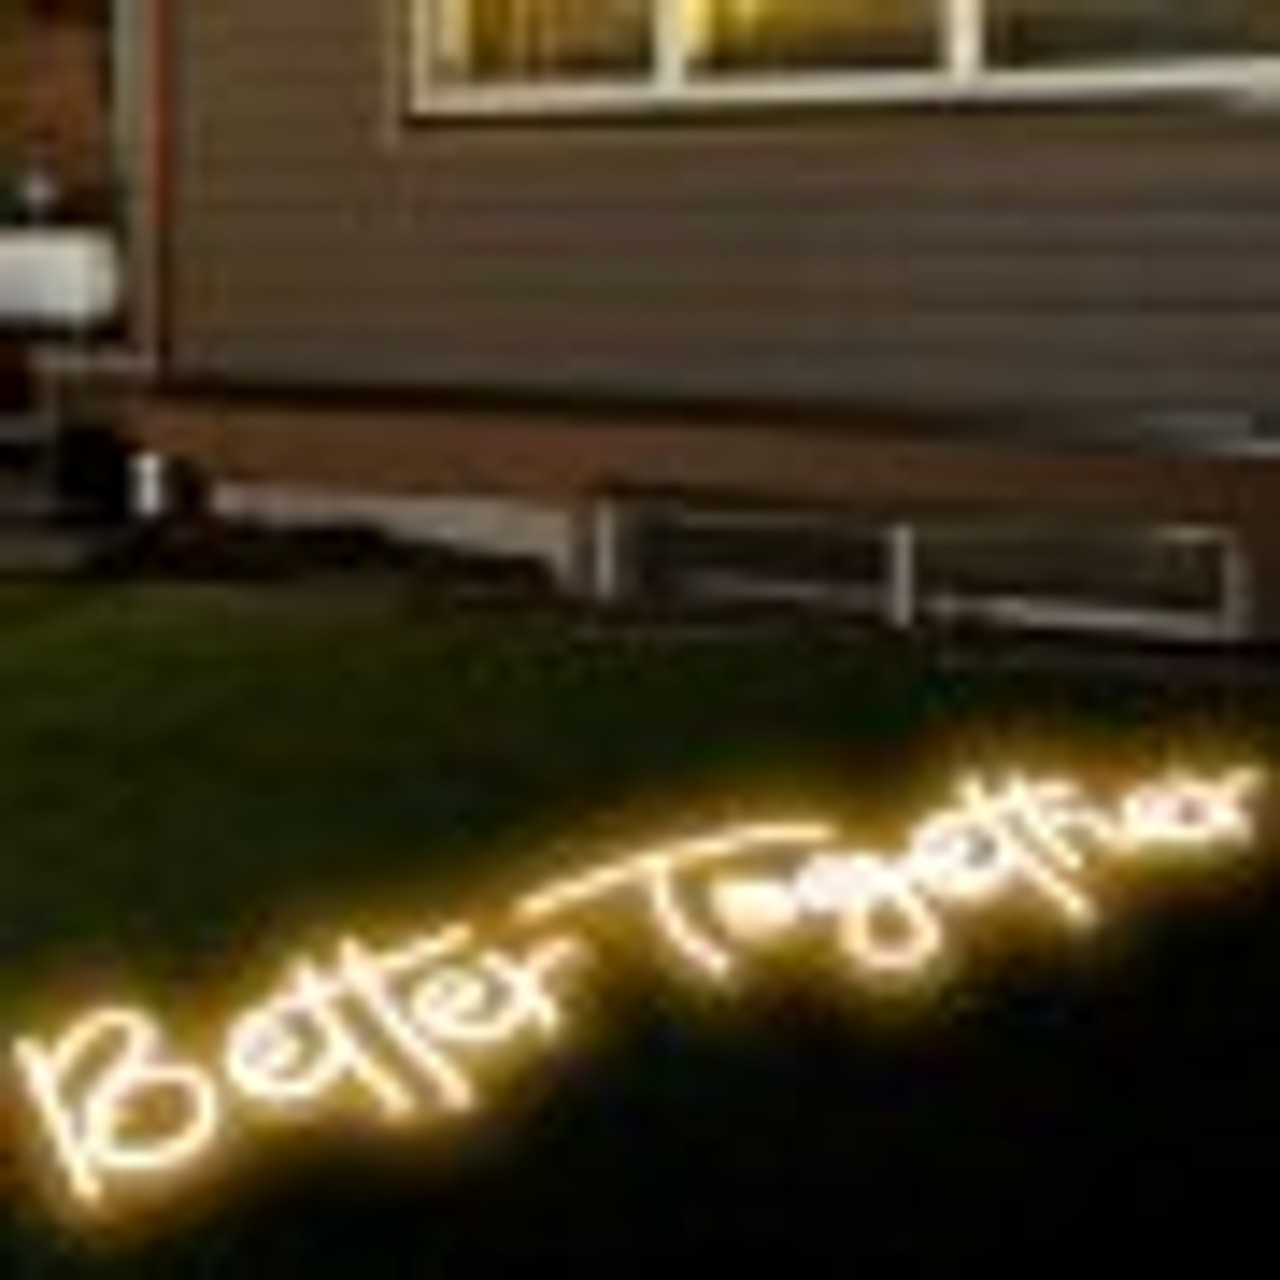 Better Together Neon Sign, 13" x 7" +18" x 8" Warm White LED lights Sign, Adjustable Brightness with Remote Control, Used for Home, Party, Wedding, and Bar Decoration (Power Adapter Included)